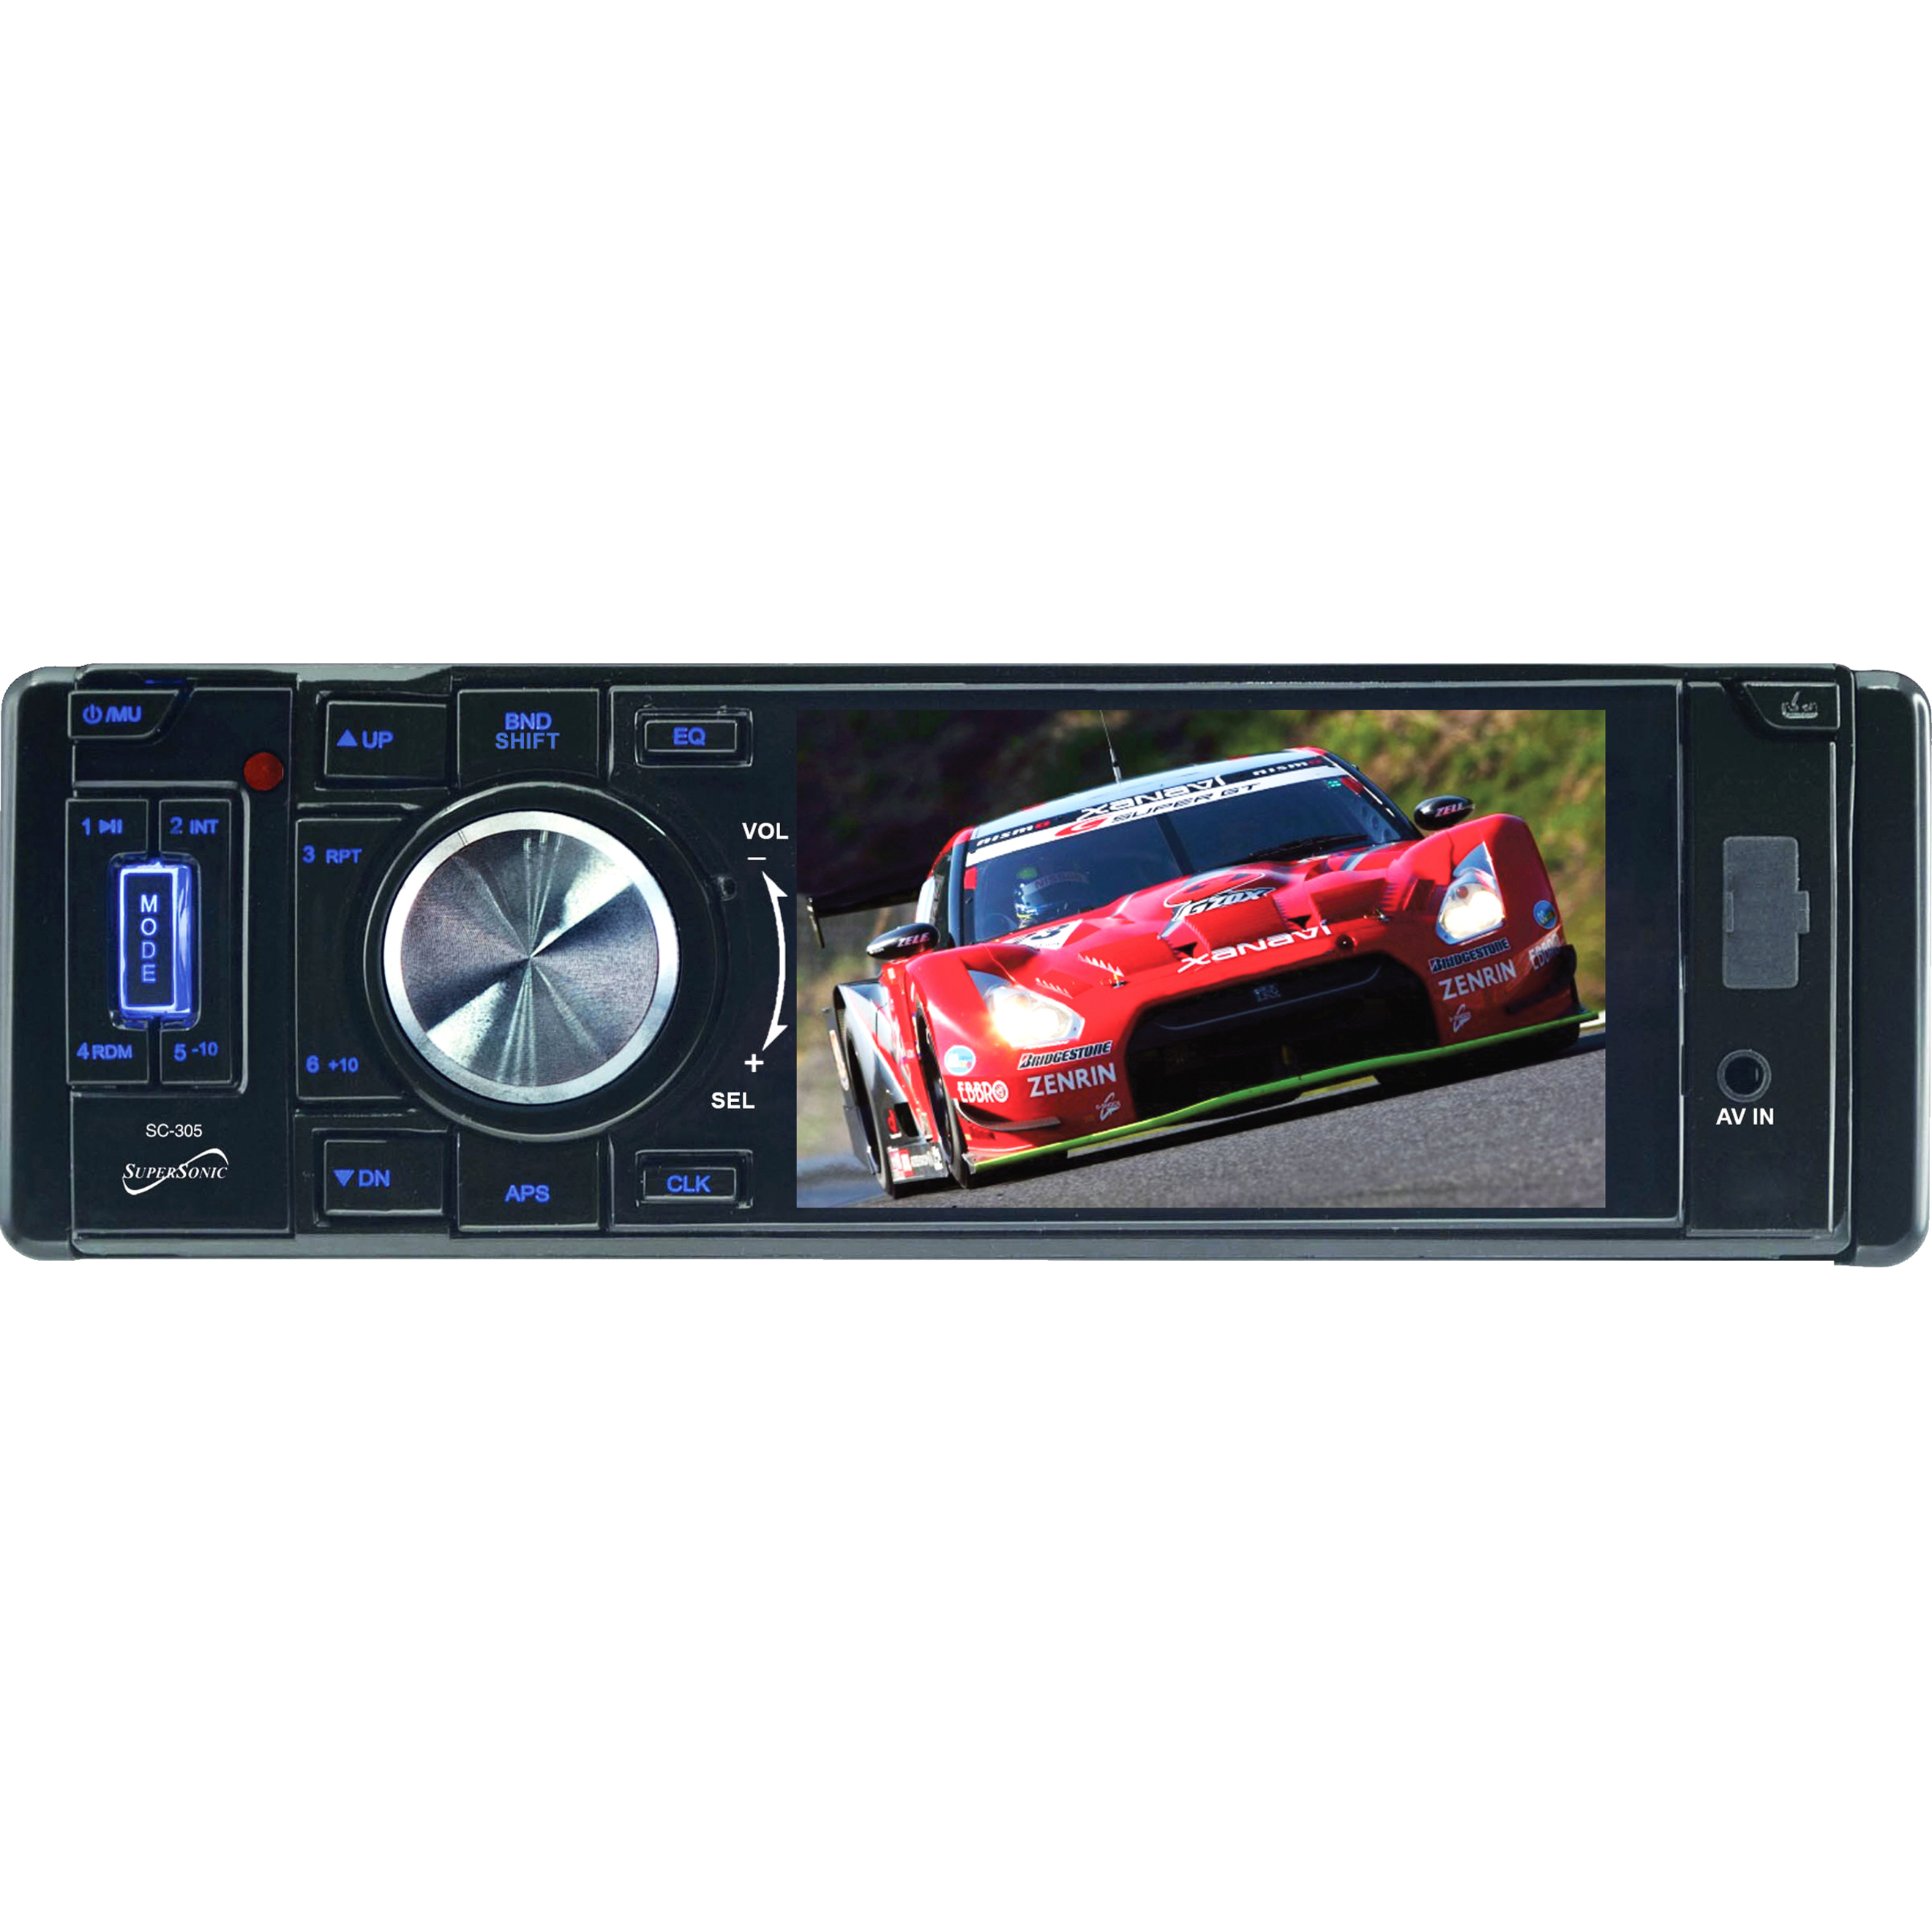 Supersonic SC-305 Car DVD Player, 3.5" LCD, Detachable Front Panel - image 1 of 2